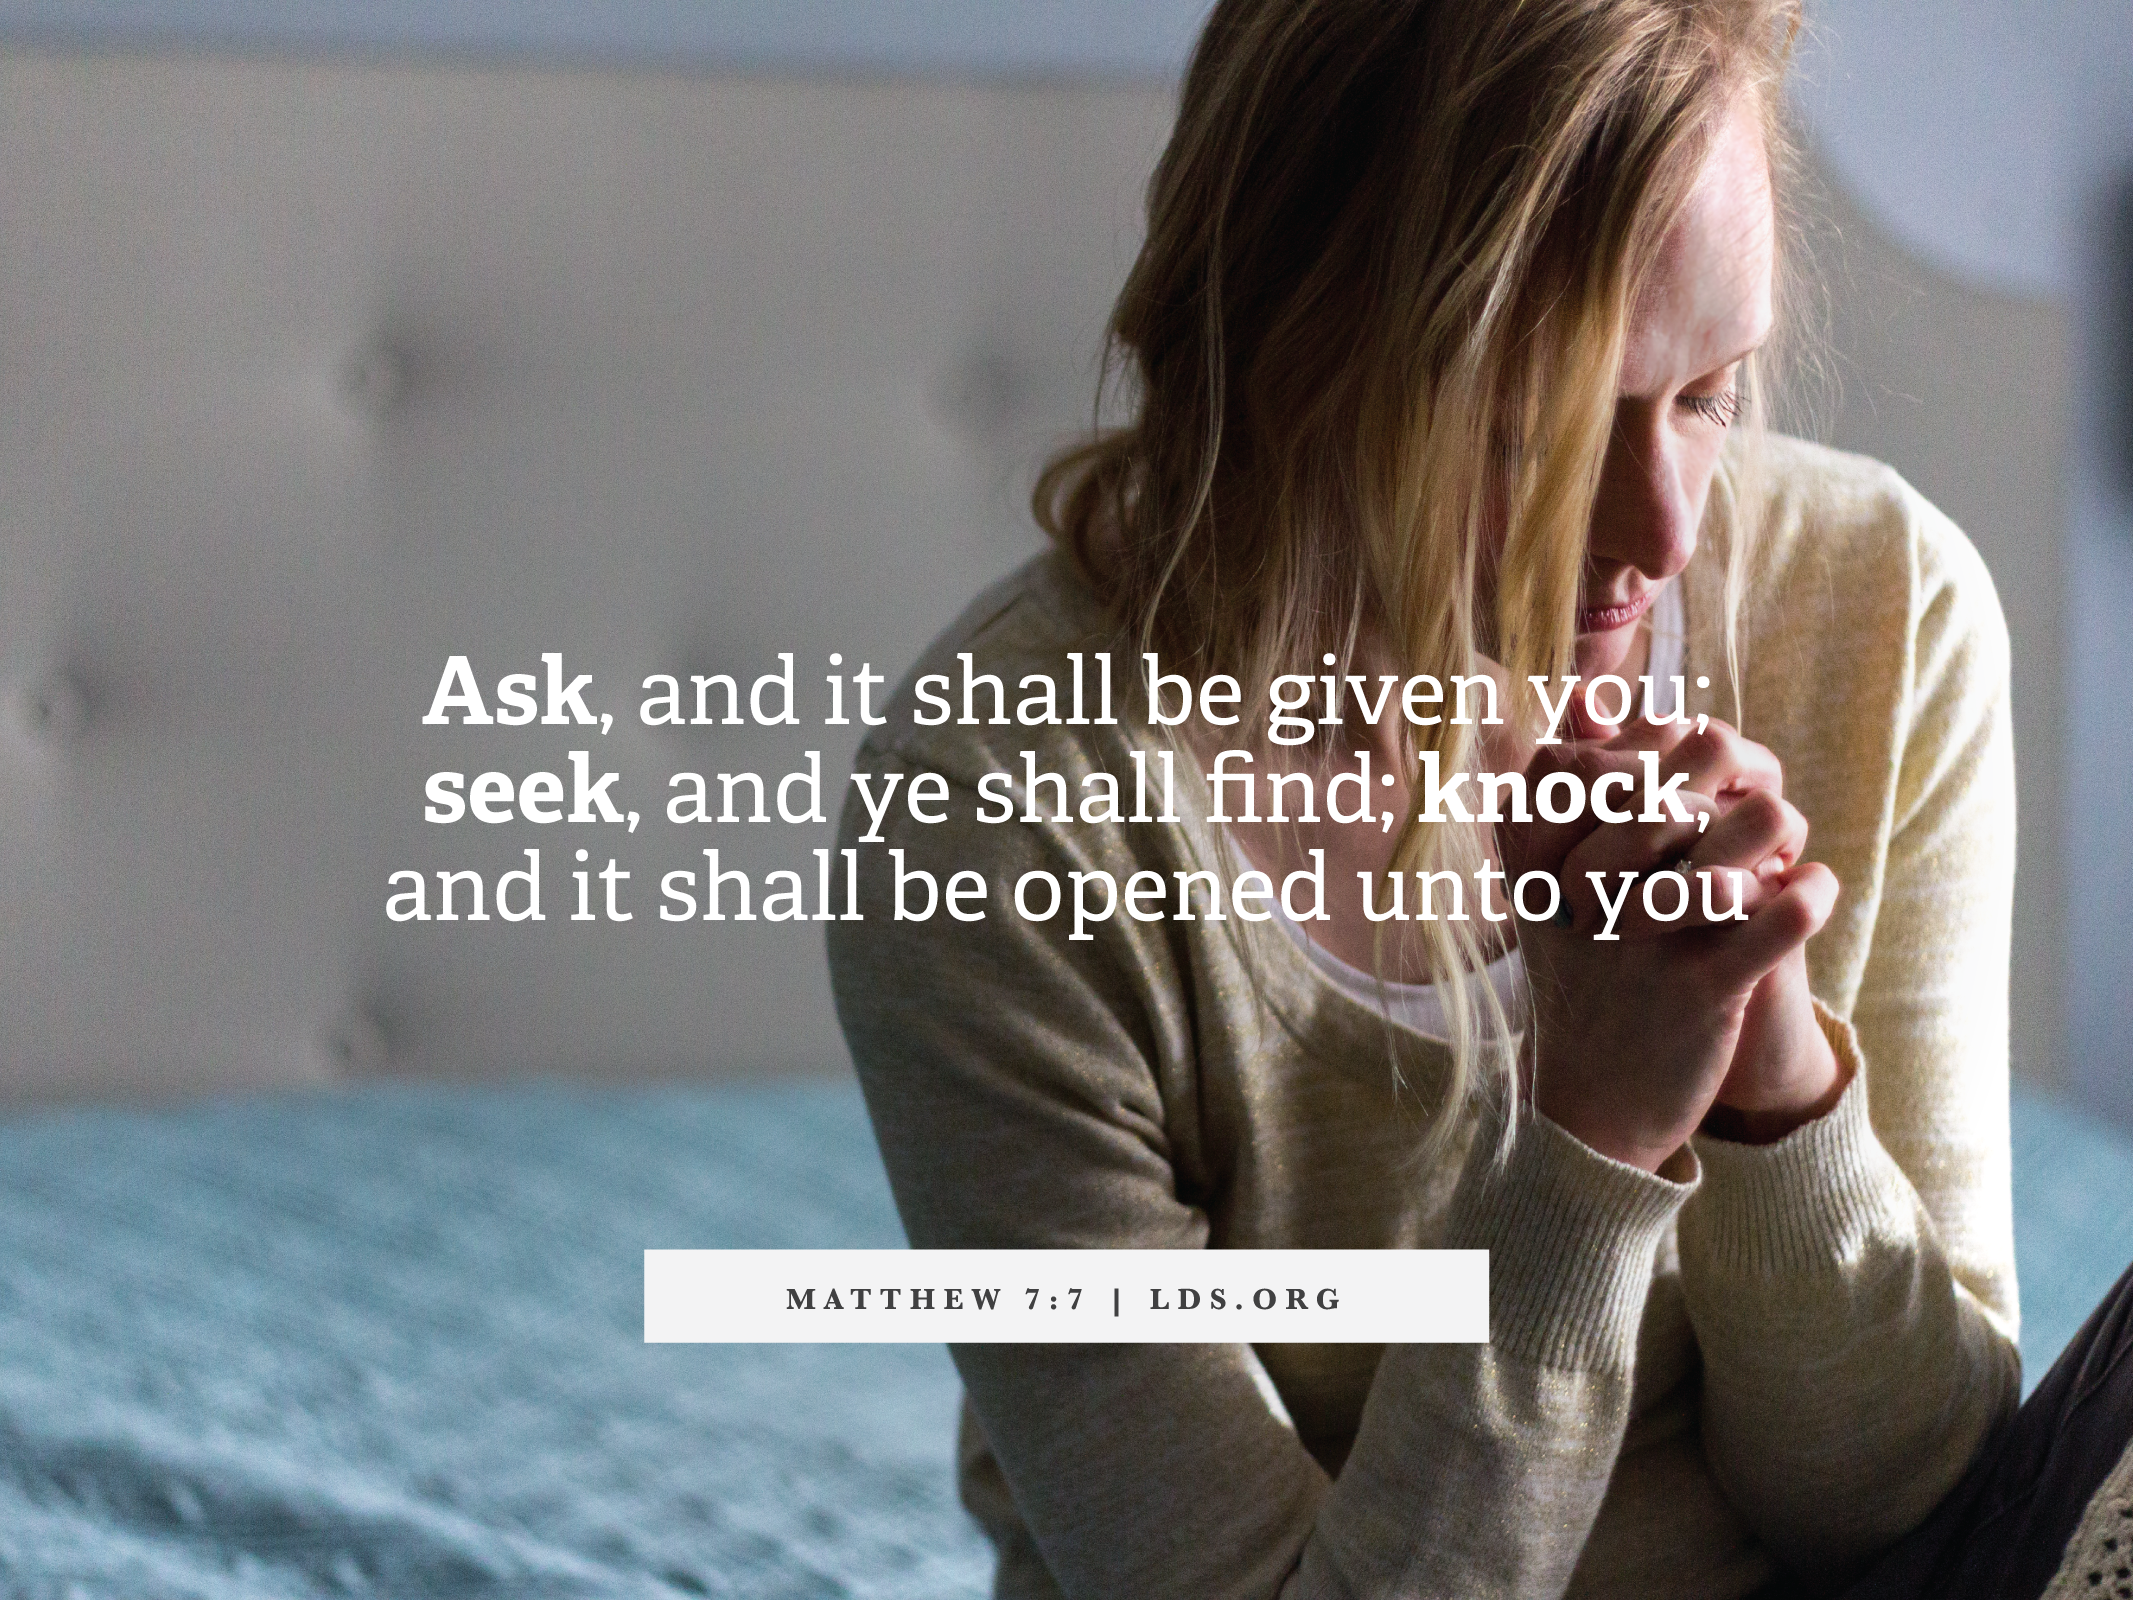 Meme with a quote from Matthew 7:7 reading "Ask, and it shall be given you; seek, and ye shall find; knock and it shall be opened unto you."  English language.